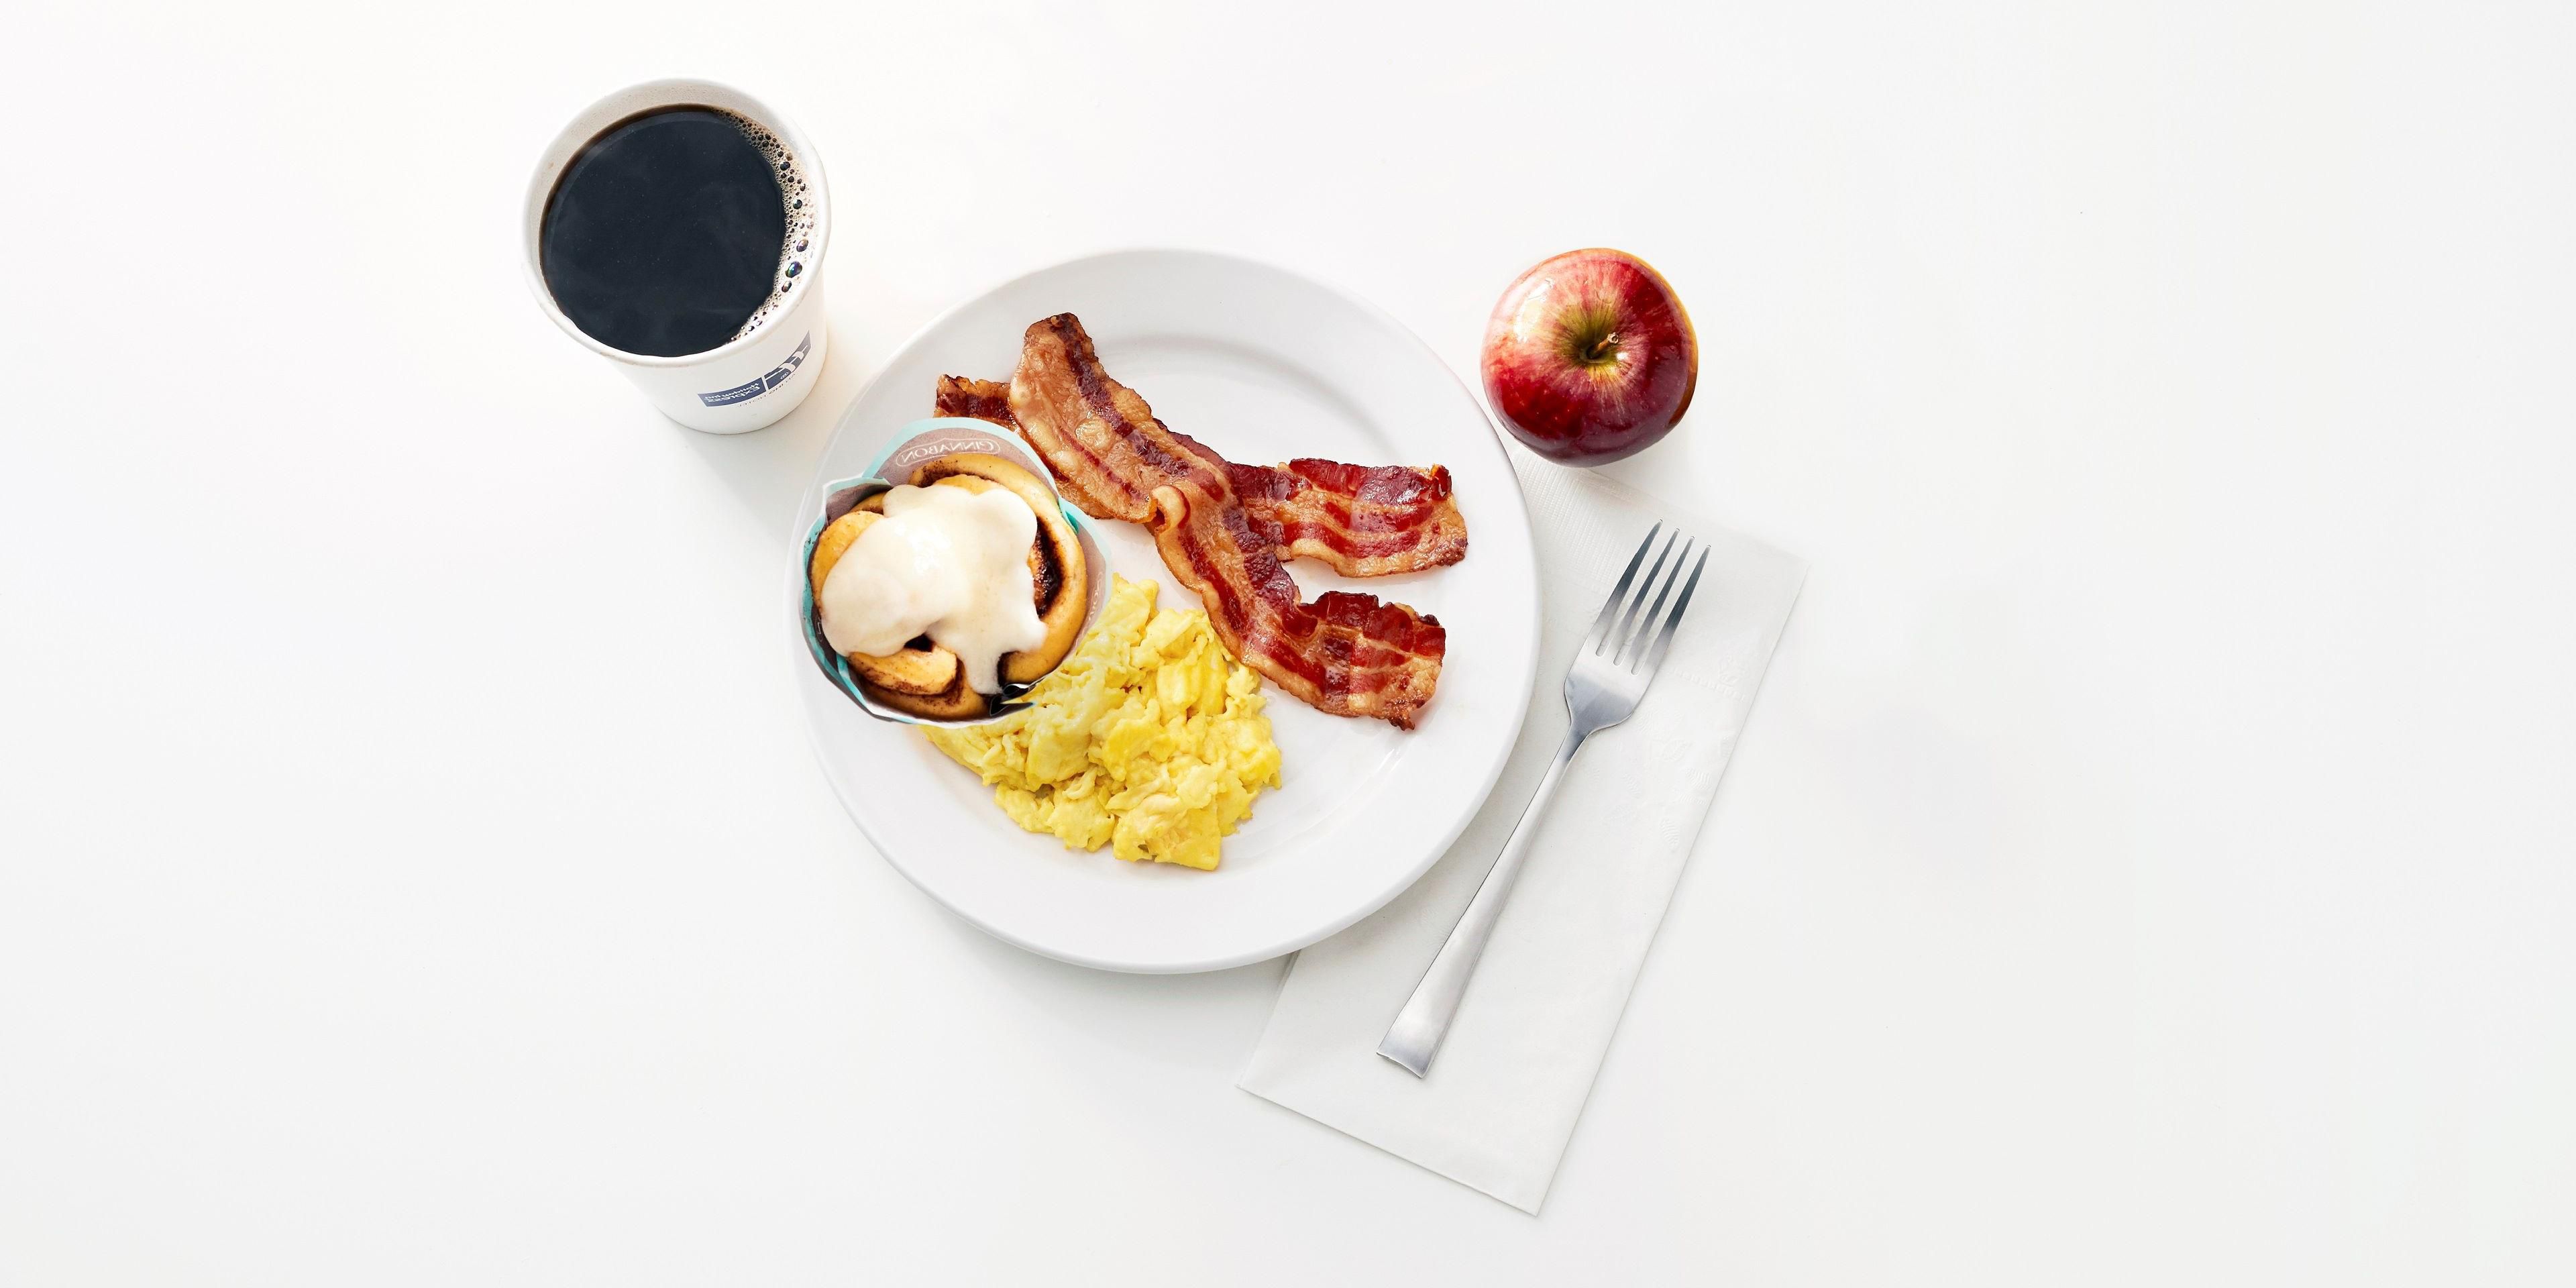 Kick start your day with our Express Start Breakfast, with grab ‘n’ go options and favorites such as eggs and bacon, hot pancakes, our signature cinnamon rolls and fresh coffee. Offered from 6:30am - 9:00am everyday.